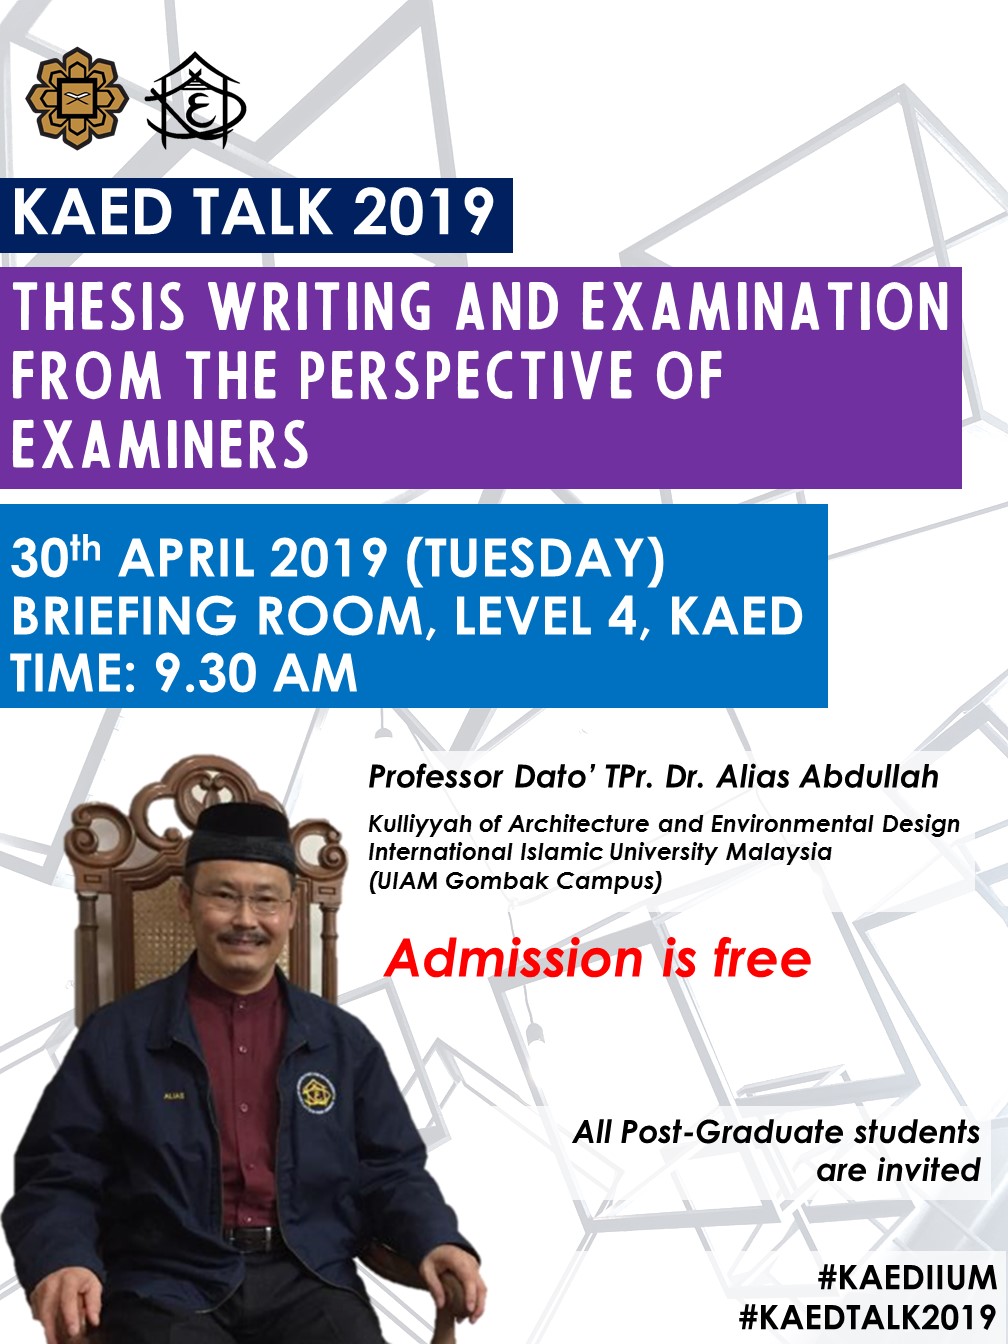 KAED Talk 2019: Thesis Writing and Examination from the Perspective of Examiners by Professor Dato' TPr. Dr. Alias Abdullah